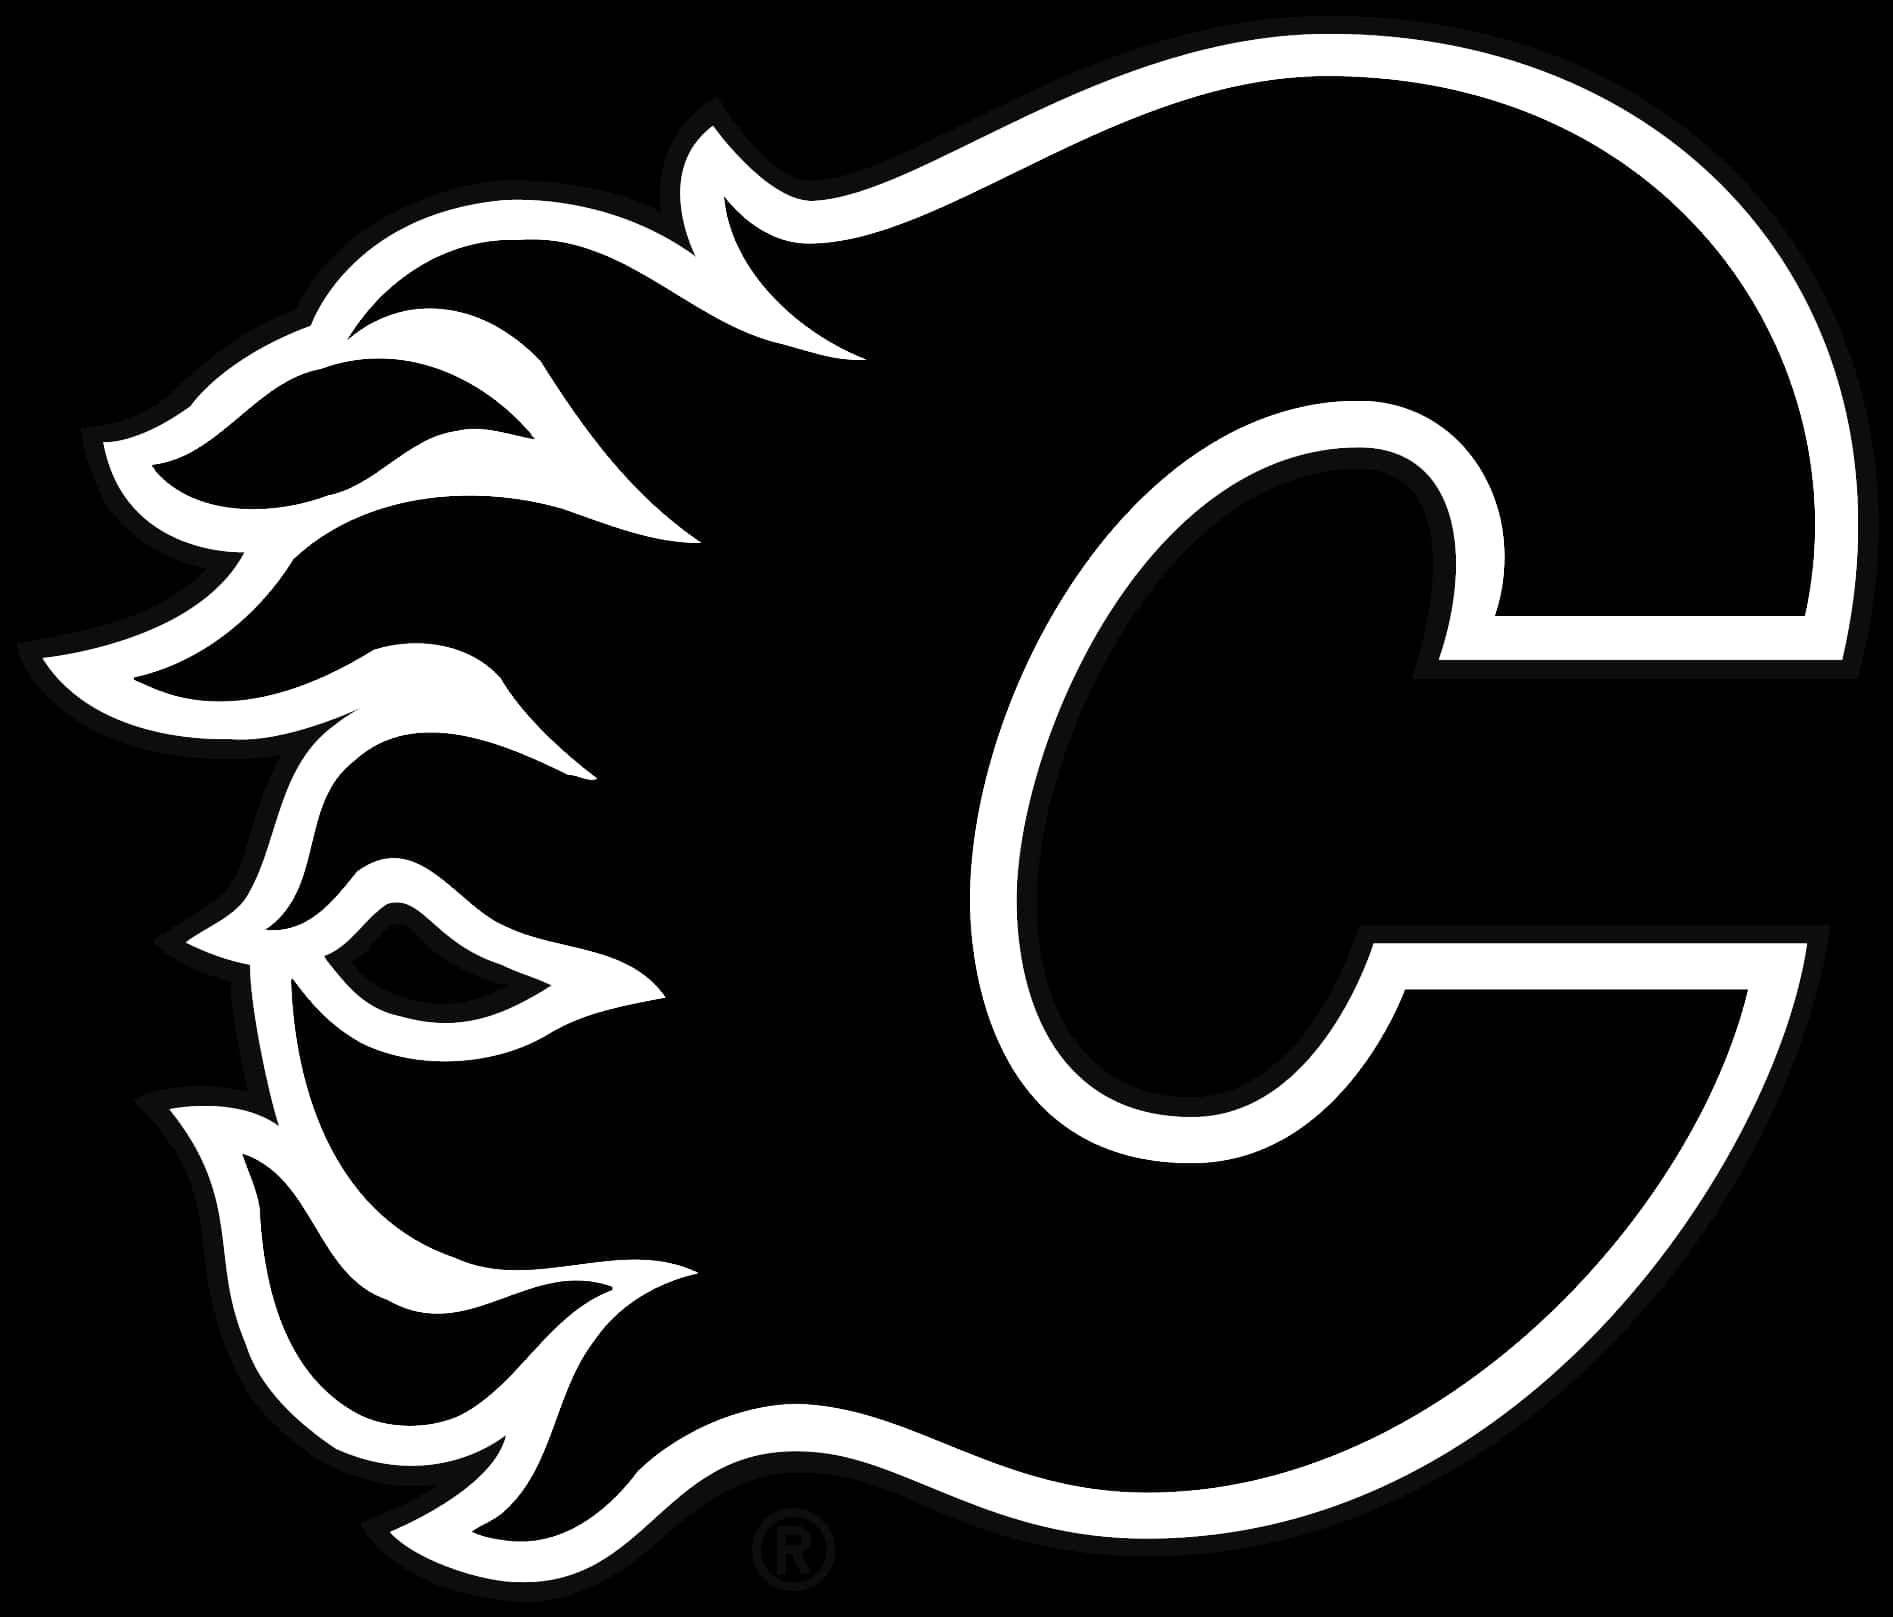 Flames On Letter C